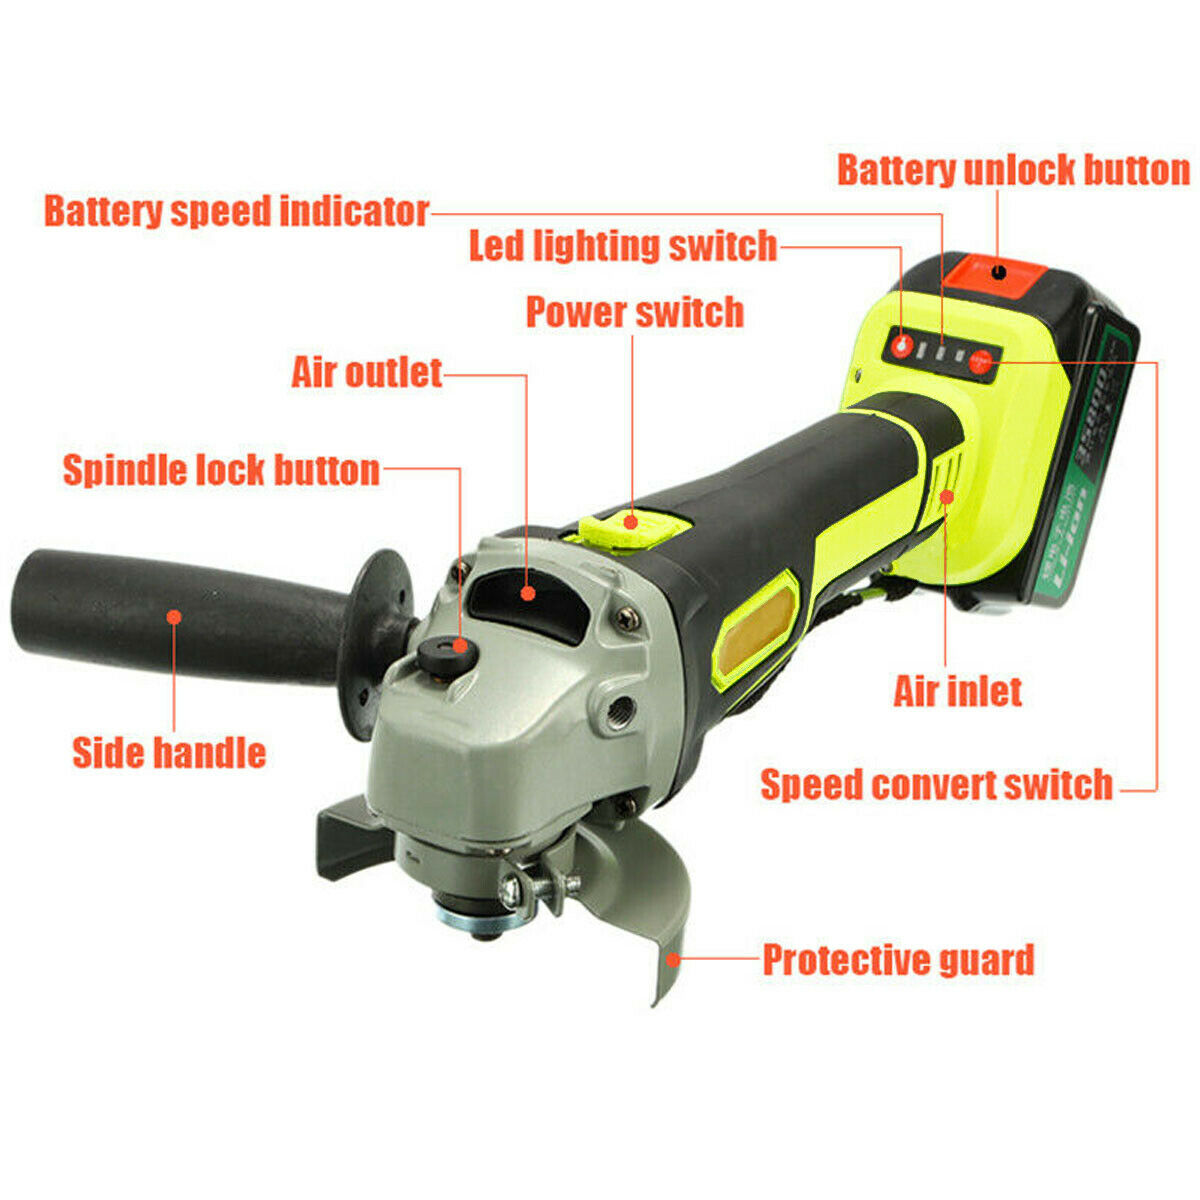 128V-Electric-Cordless-Brushless-Angle-Grinder-Polishing-Metal-Cutting-Tool-Set-with-One-Battery-US--1645559